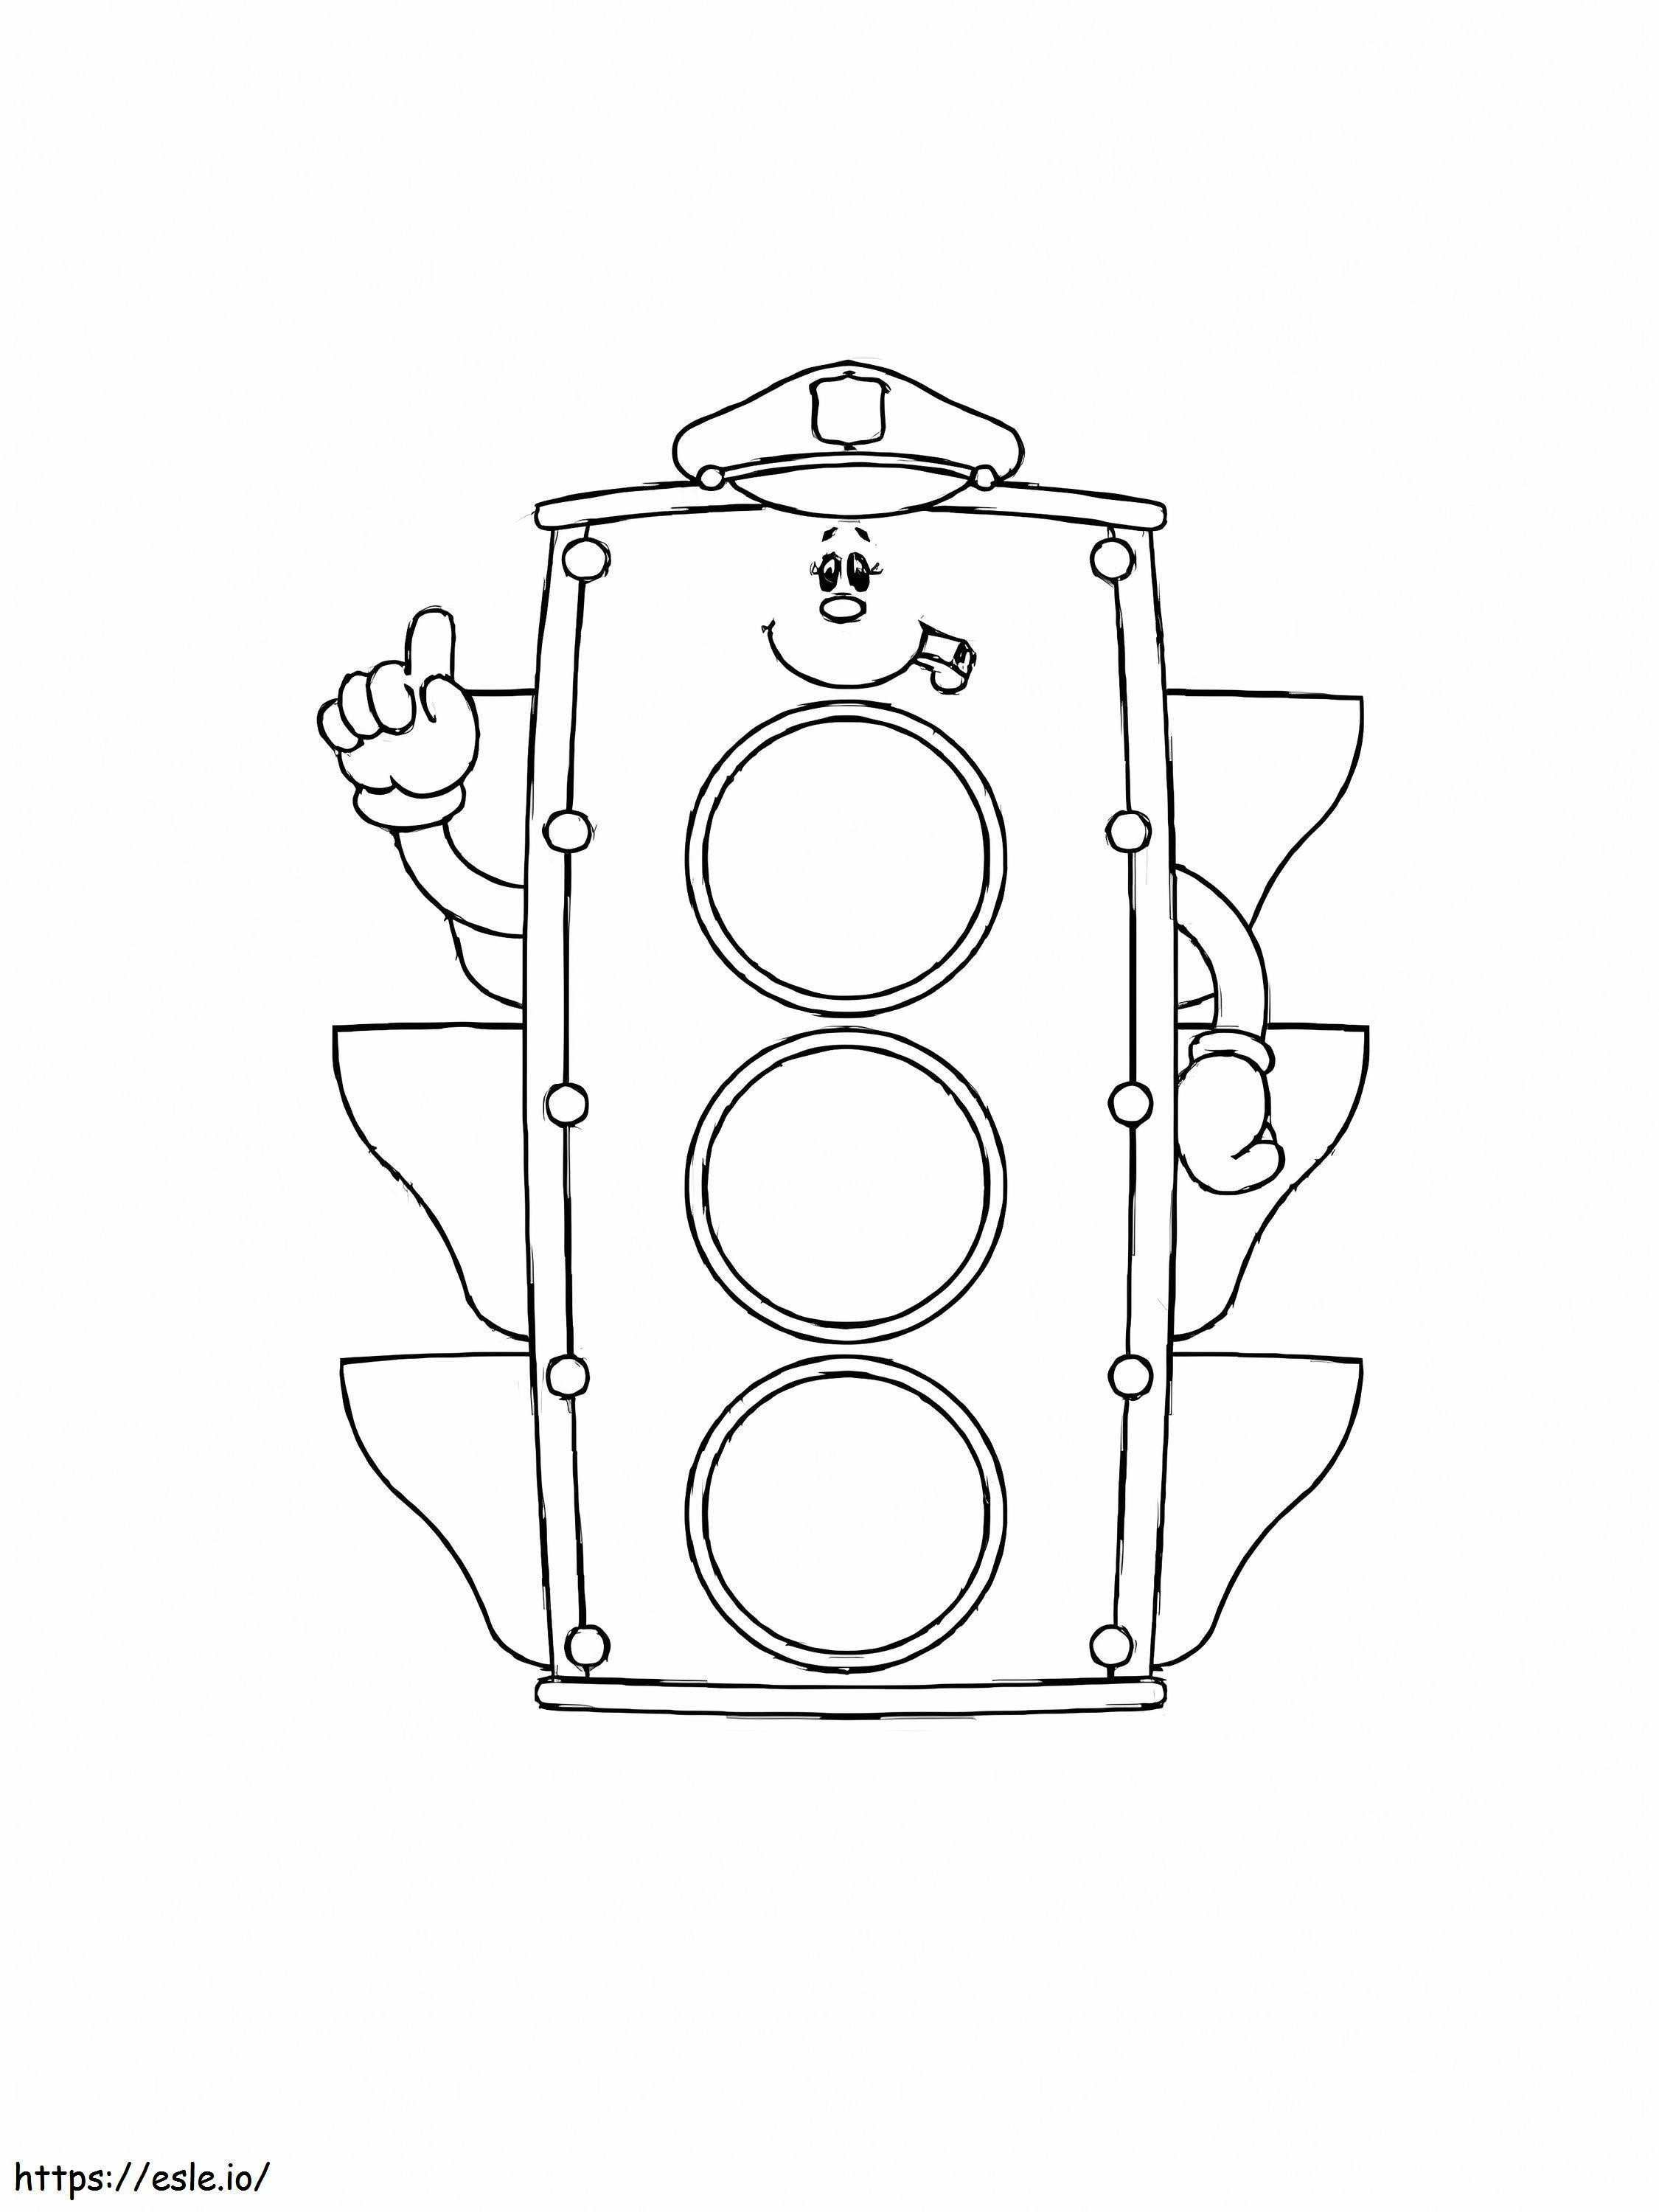 Policeman Traffic Light coloring page